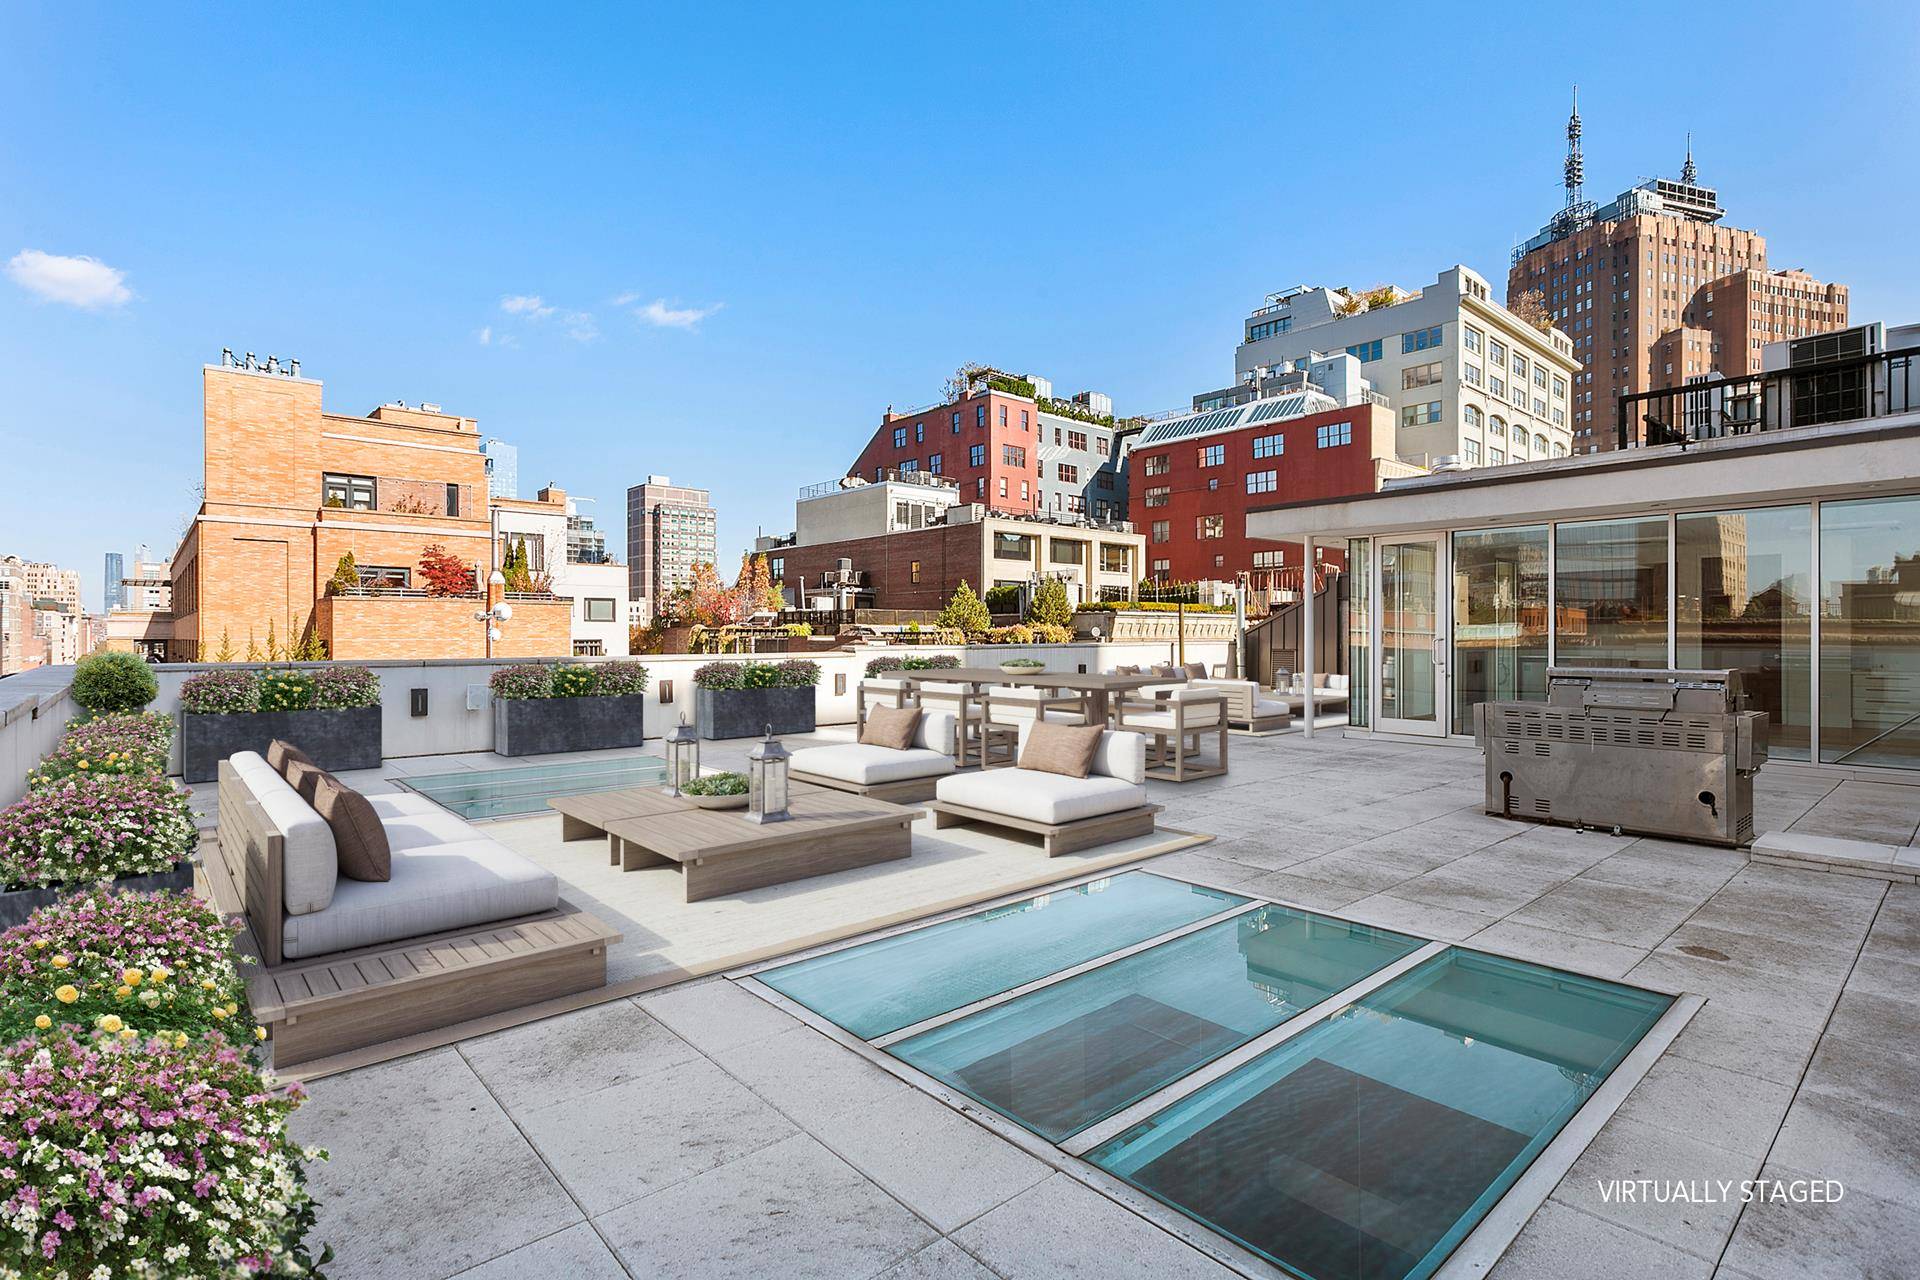 Available June 10th. Presenting the Penthouse Residence at 44 North Moore, the finest brand new boutique rental building located on the historic cobblestone streets of Tribeca.